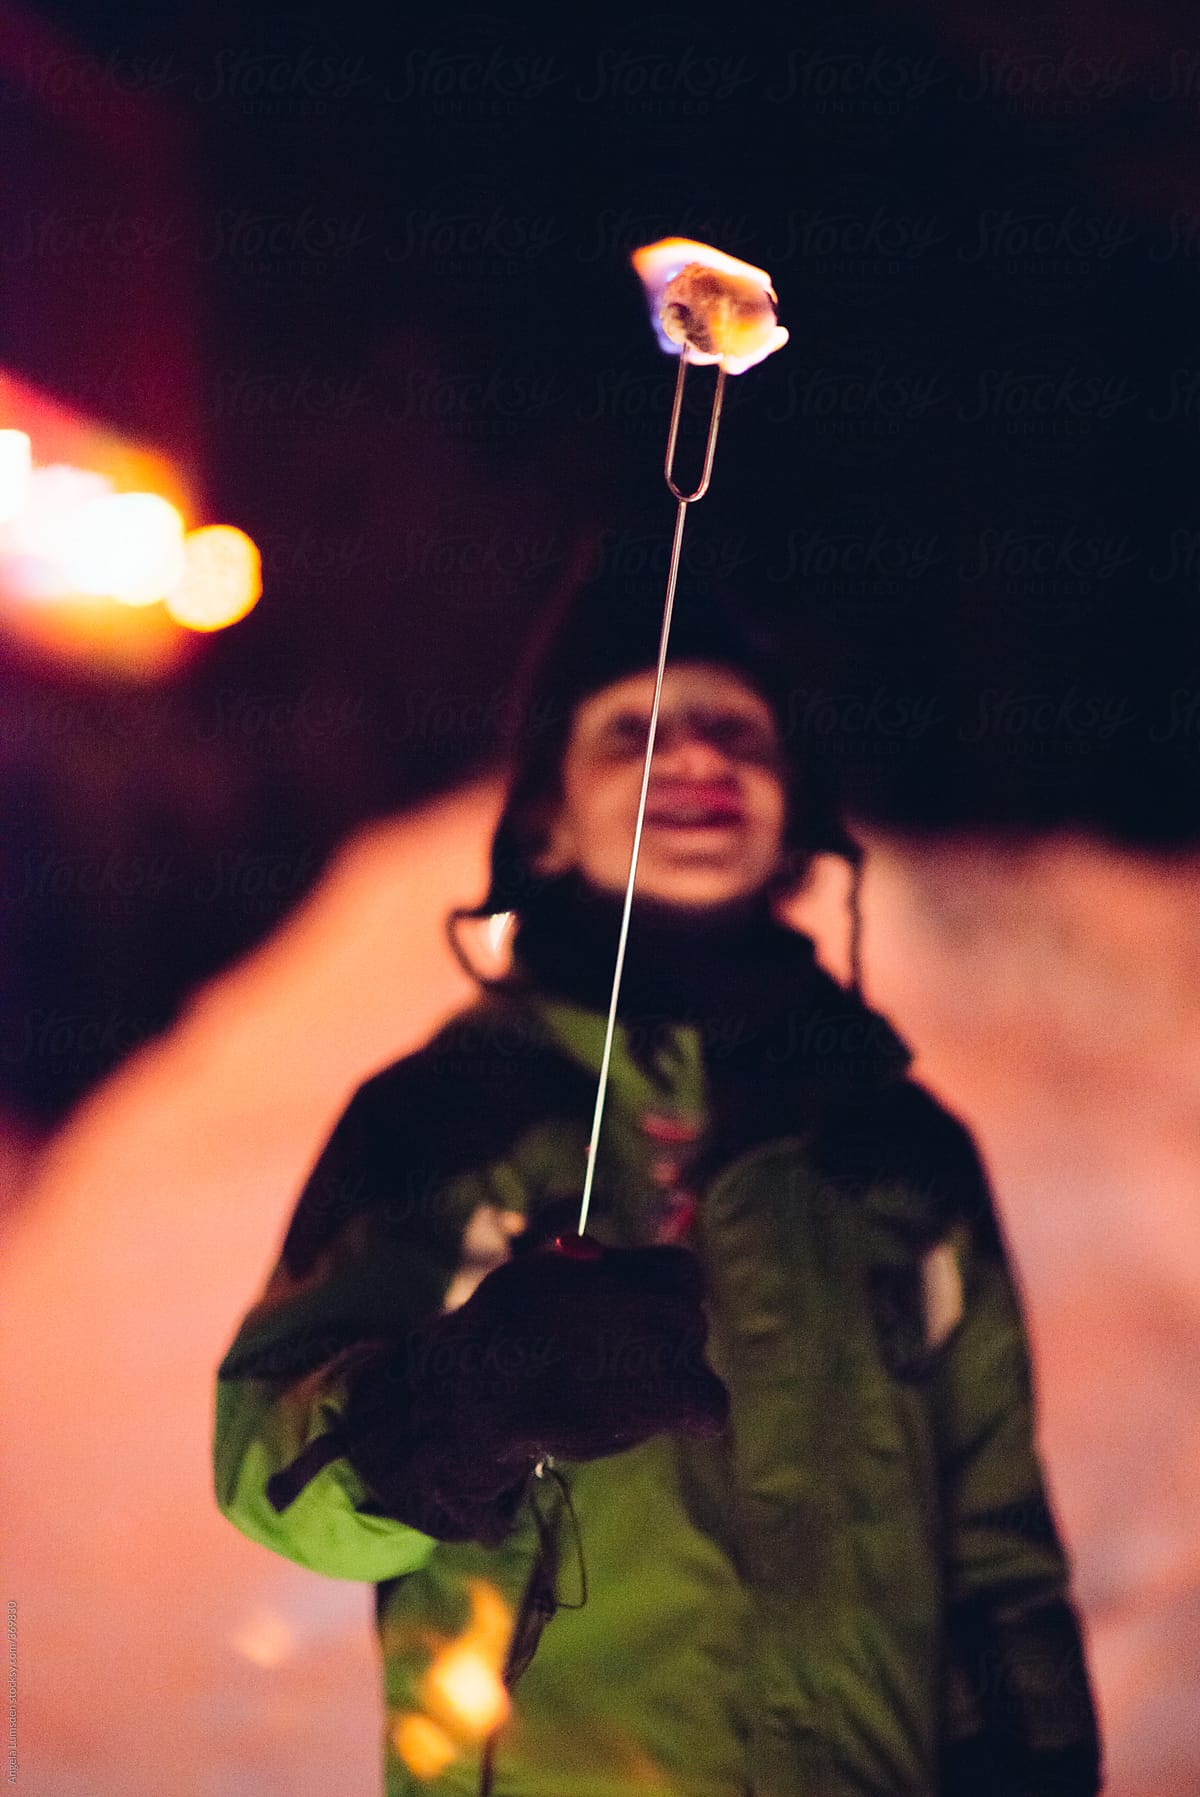 Young boy holds aloft a flaming marshmallow in the light of a camp fire in the snow at night